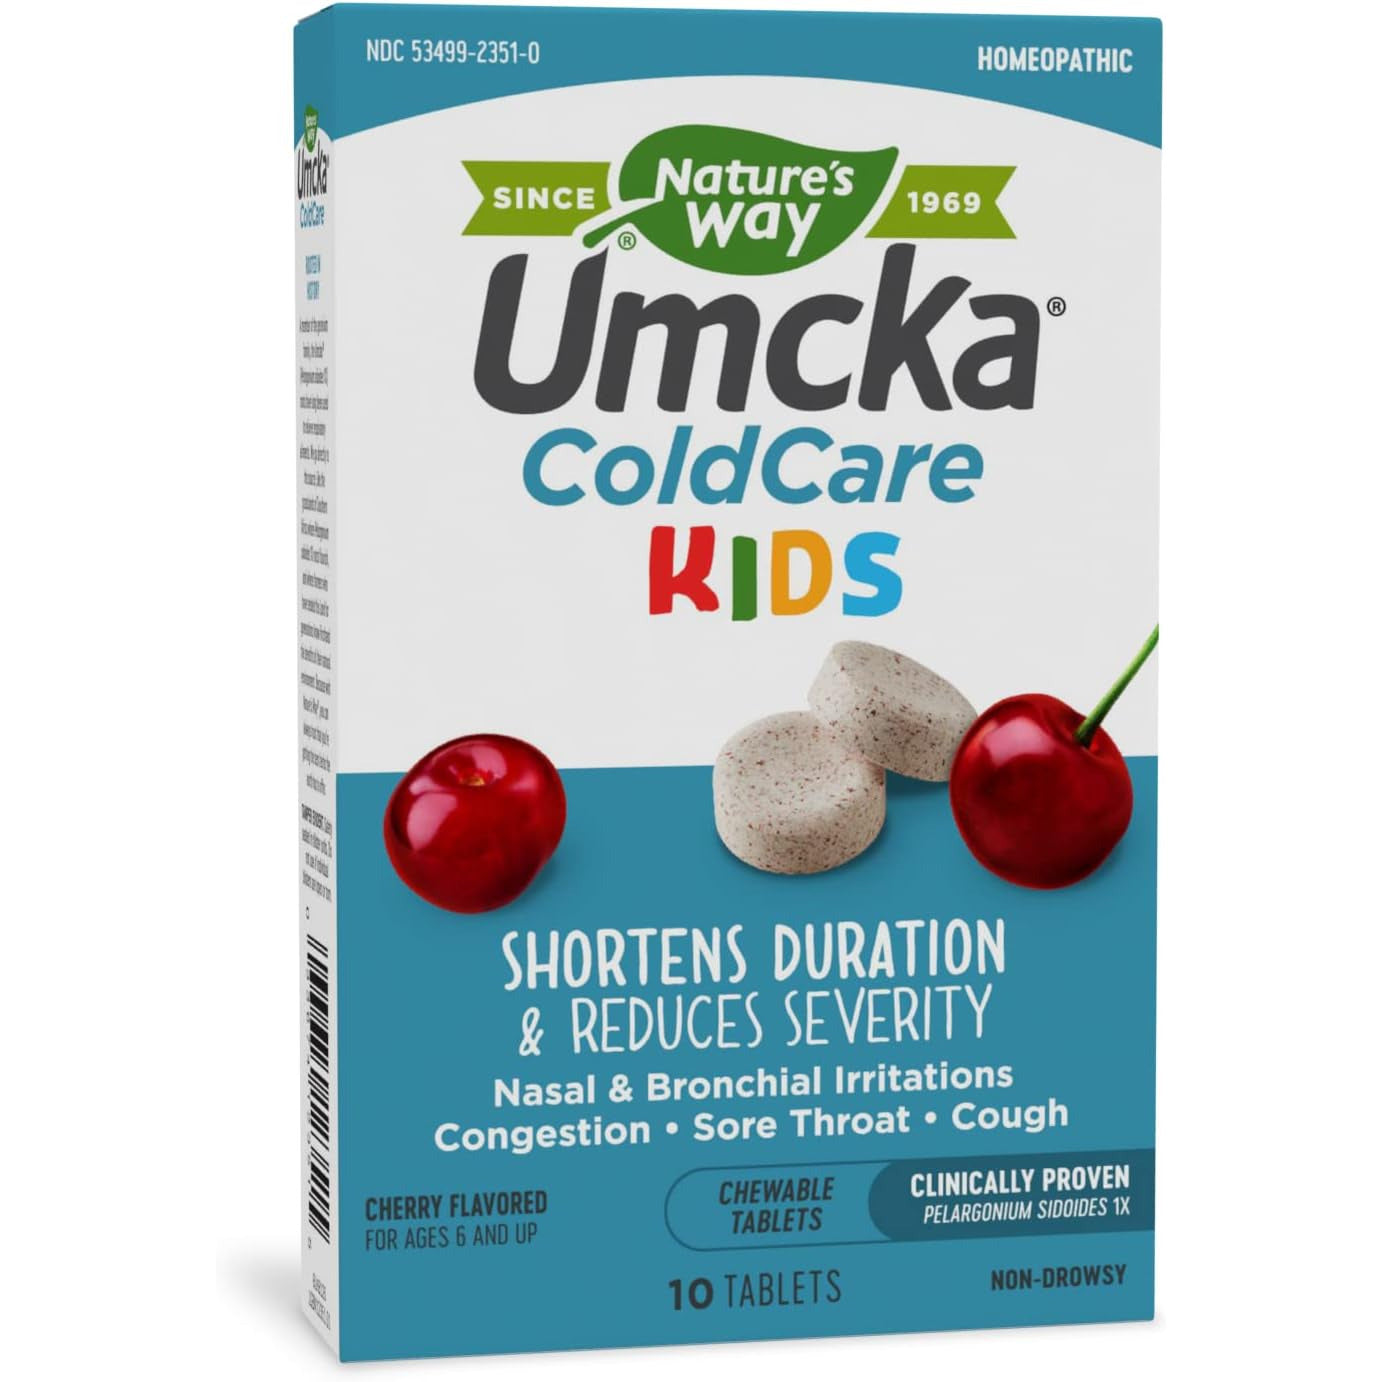 Nature's Way Umcka ColdCare Kids Chewable (Cherry)